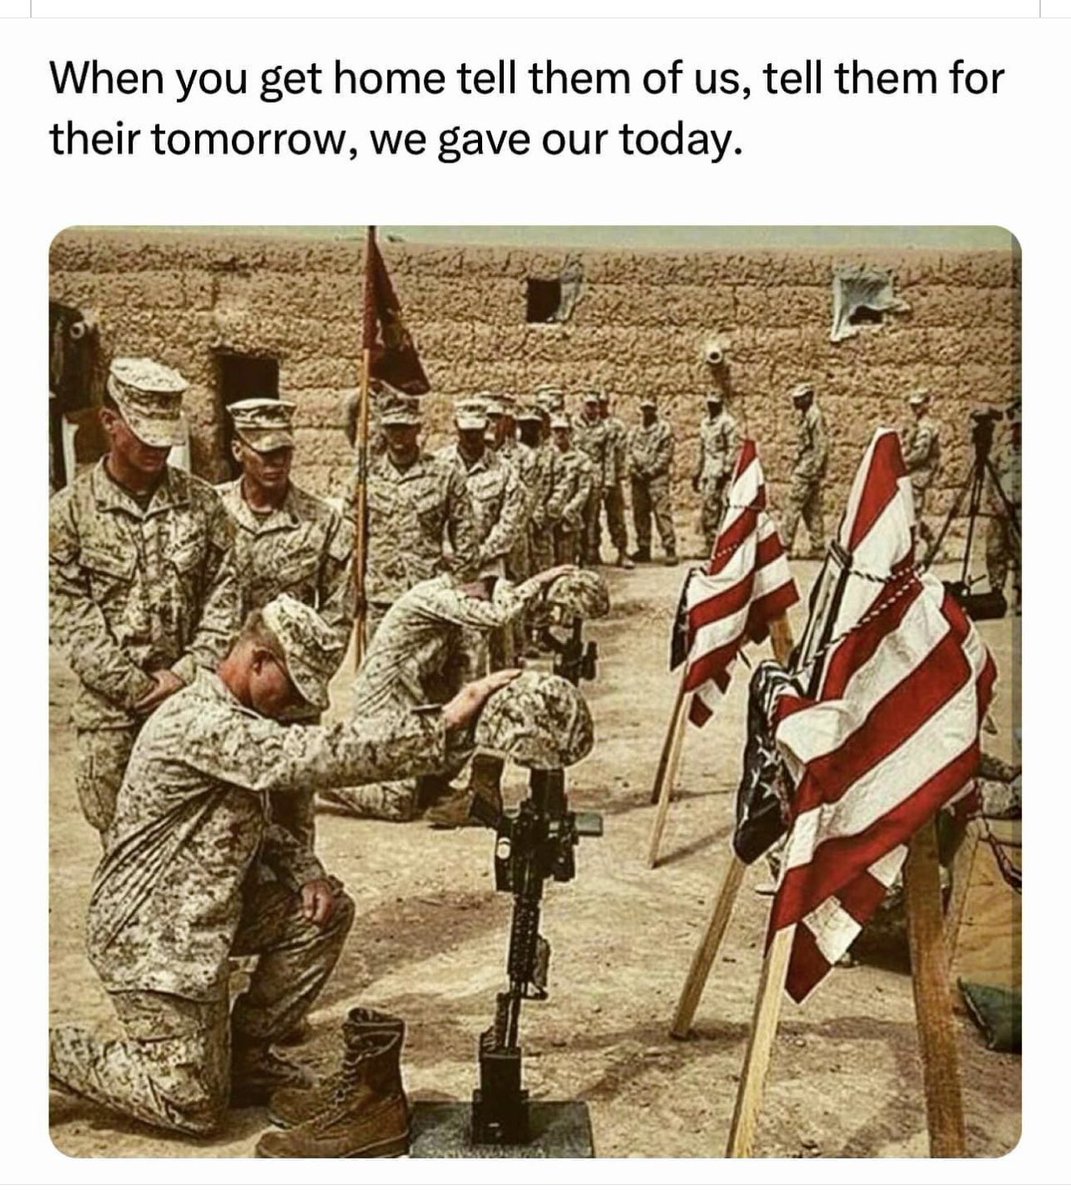 I just want to take a moment to honor and thank all of our service men and women who have sacrificed for our Country and for our rights and freedoms.🙏🇺🇸♥️